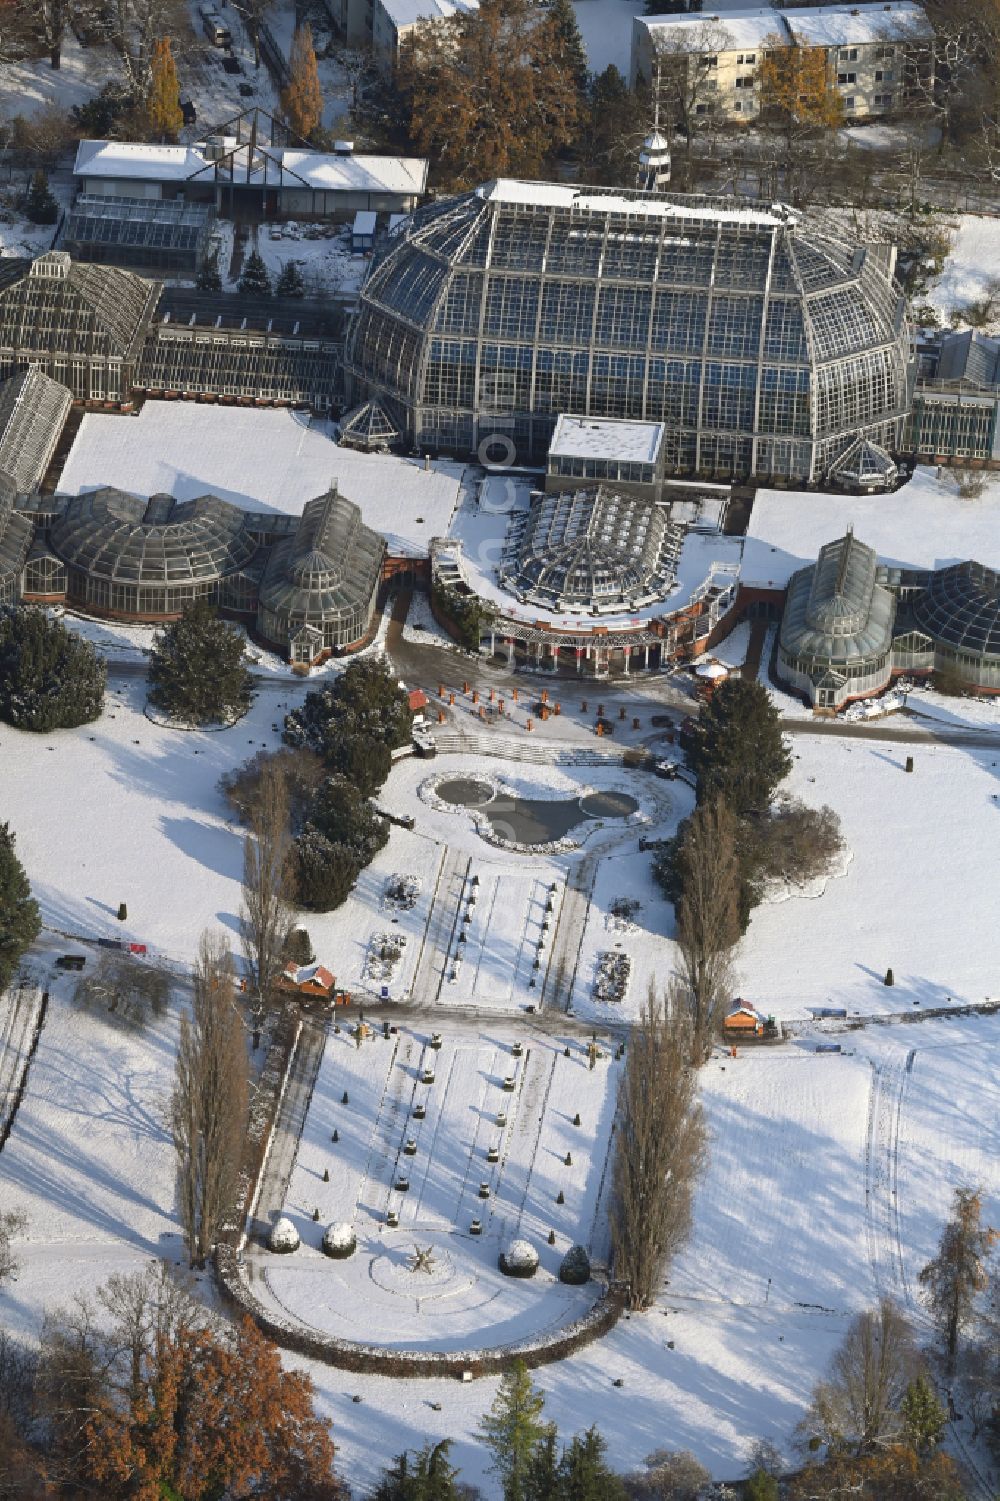 Berlin from the bird's eye view: Wintry snowy main building and greenhouse complex of the Botanical Gardens Berlin-Dahlem in Berlin. The historical glass buildings and greenhouses are dedicated to different areas. The Large Tropical House and the Victoria-House are located in the center